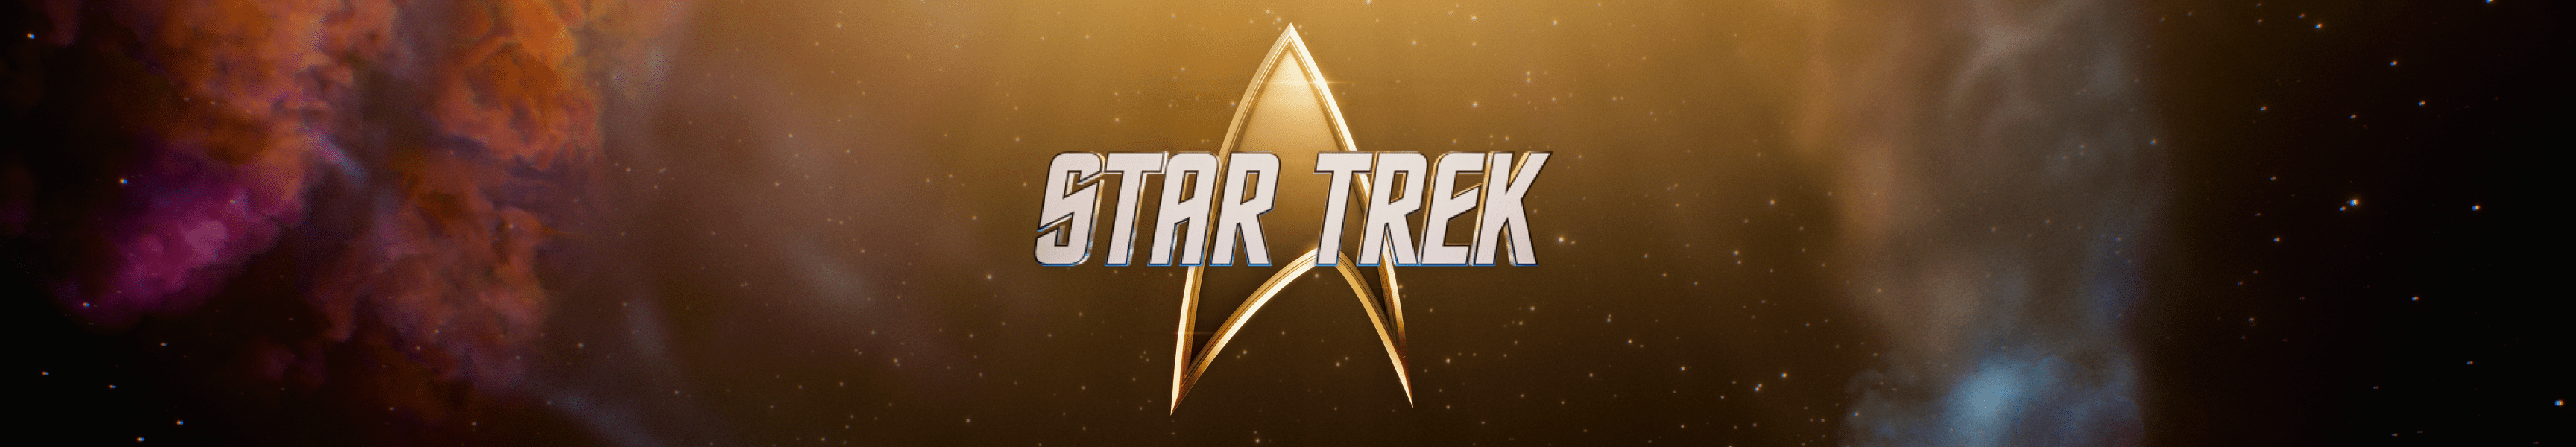 Our Gift to You: Discounted Star Trek Merchandise